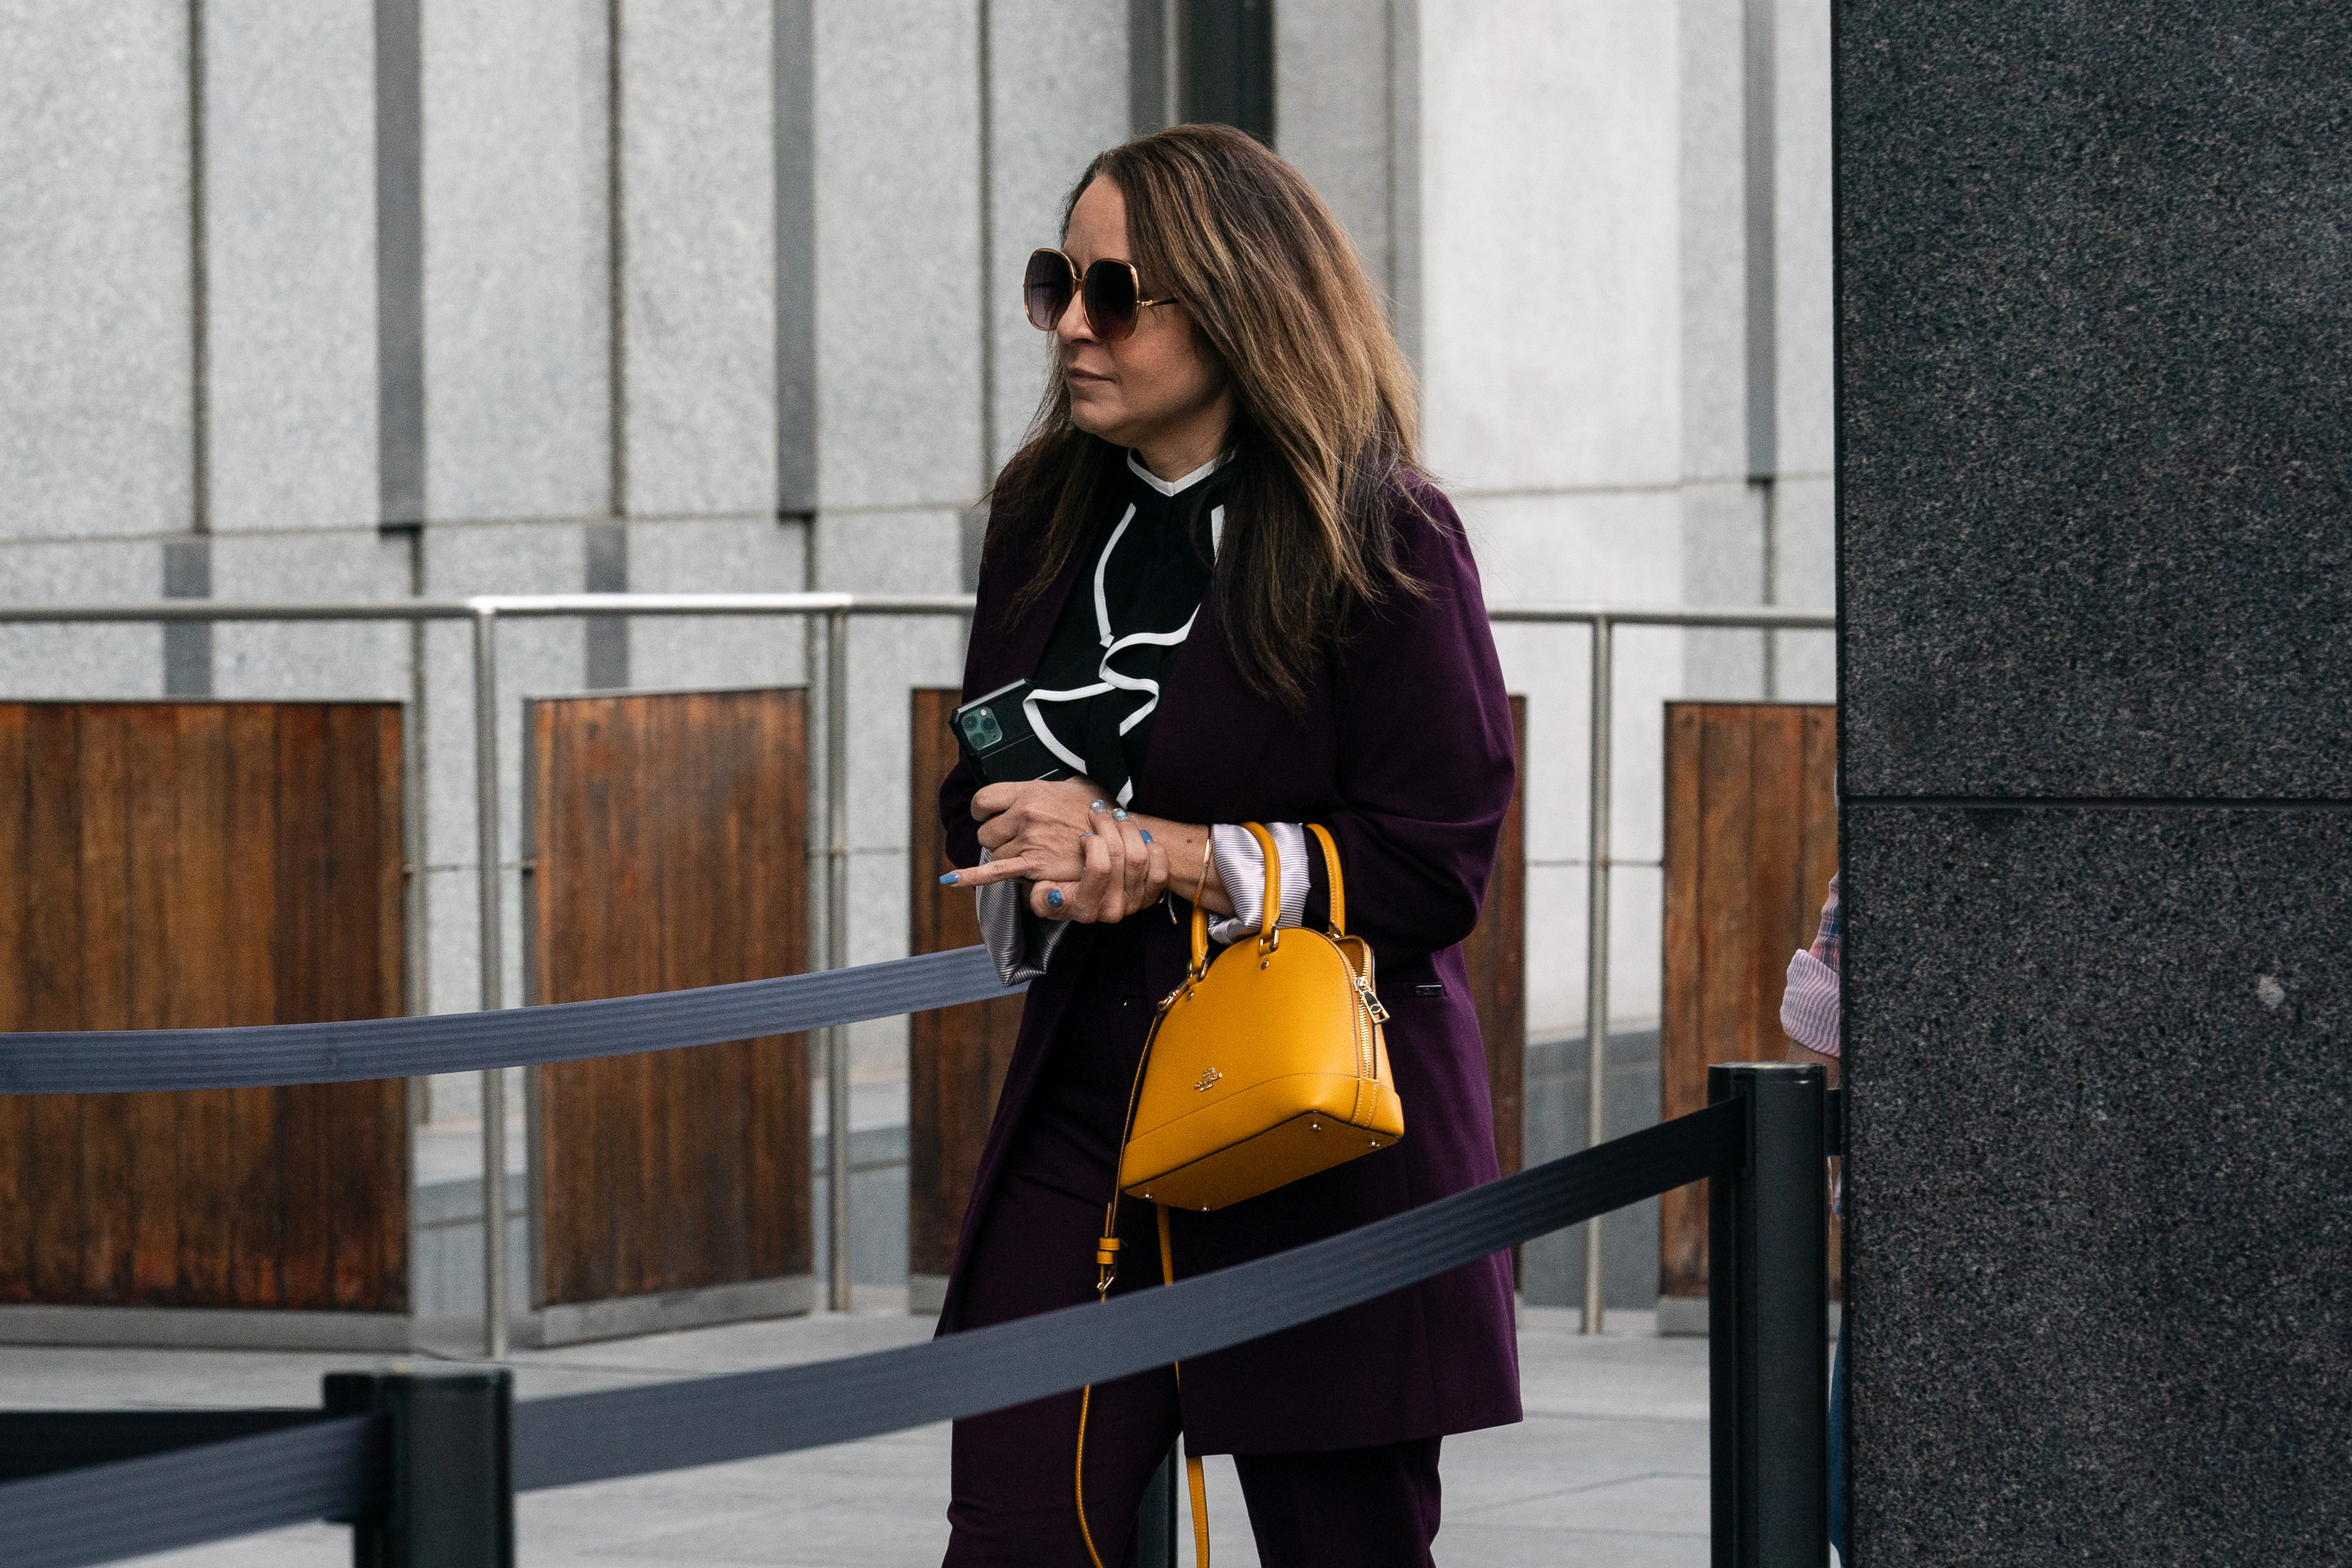 A woman with dark glasses and a yellow handbag walks between a sectioned off area on the sidewalk